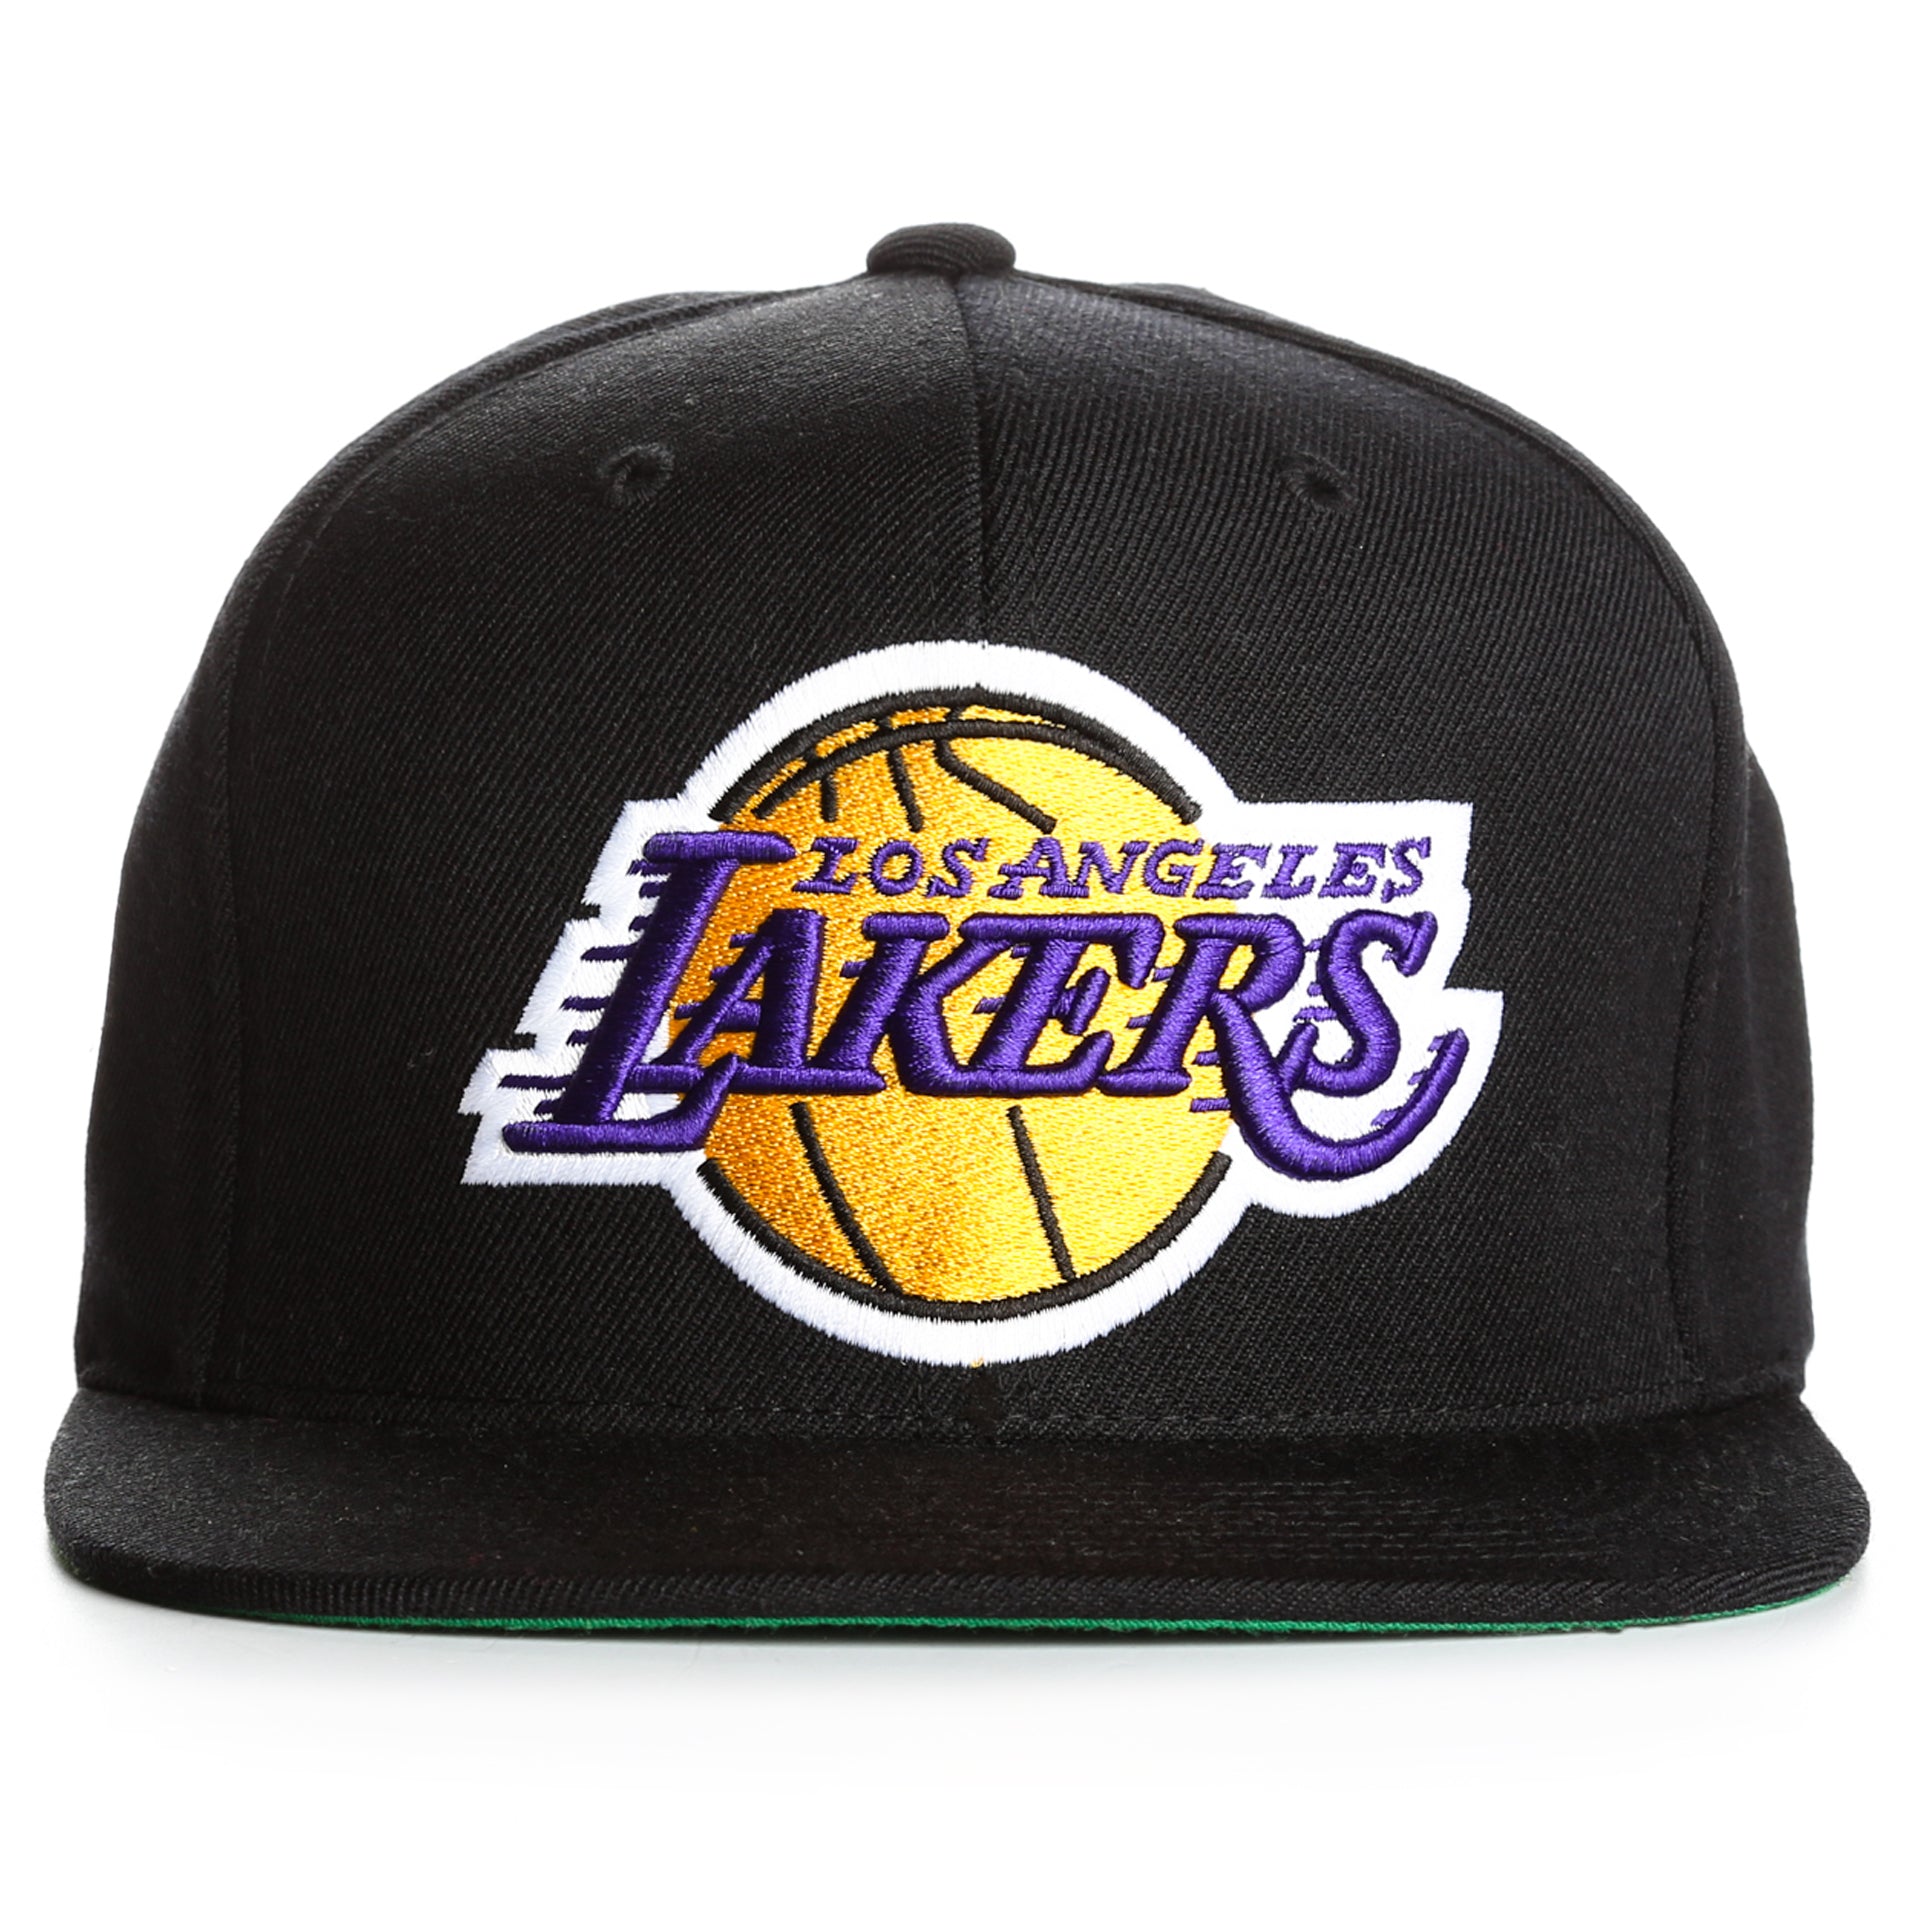 mitchell and ness snapback lakers